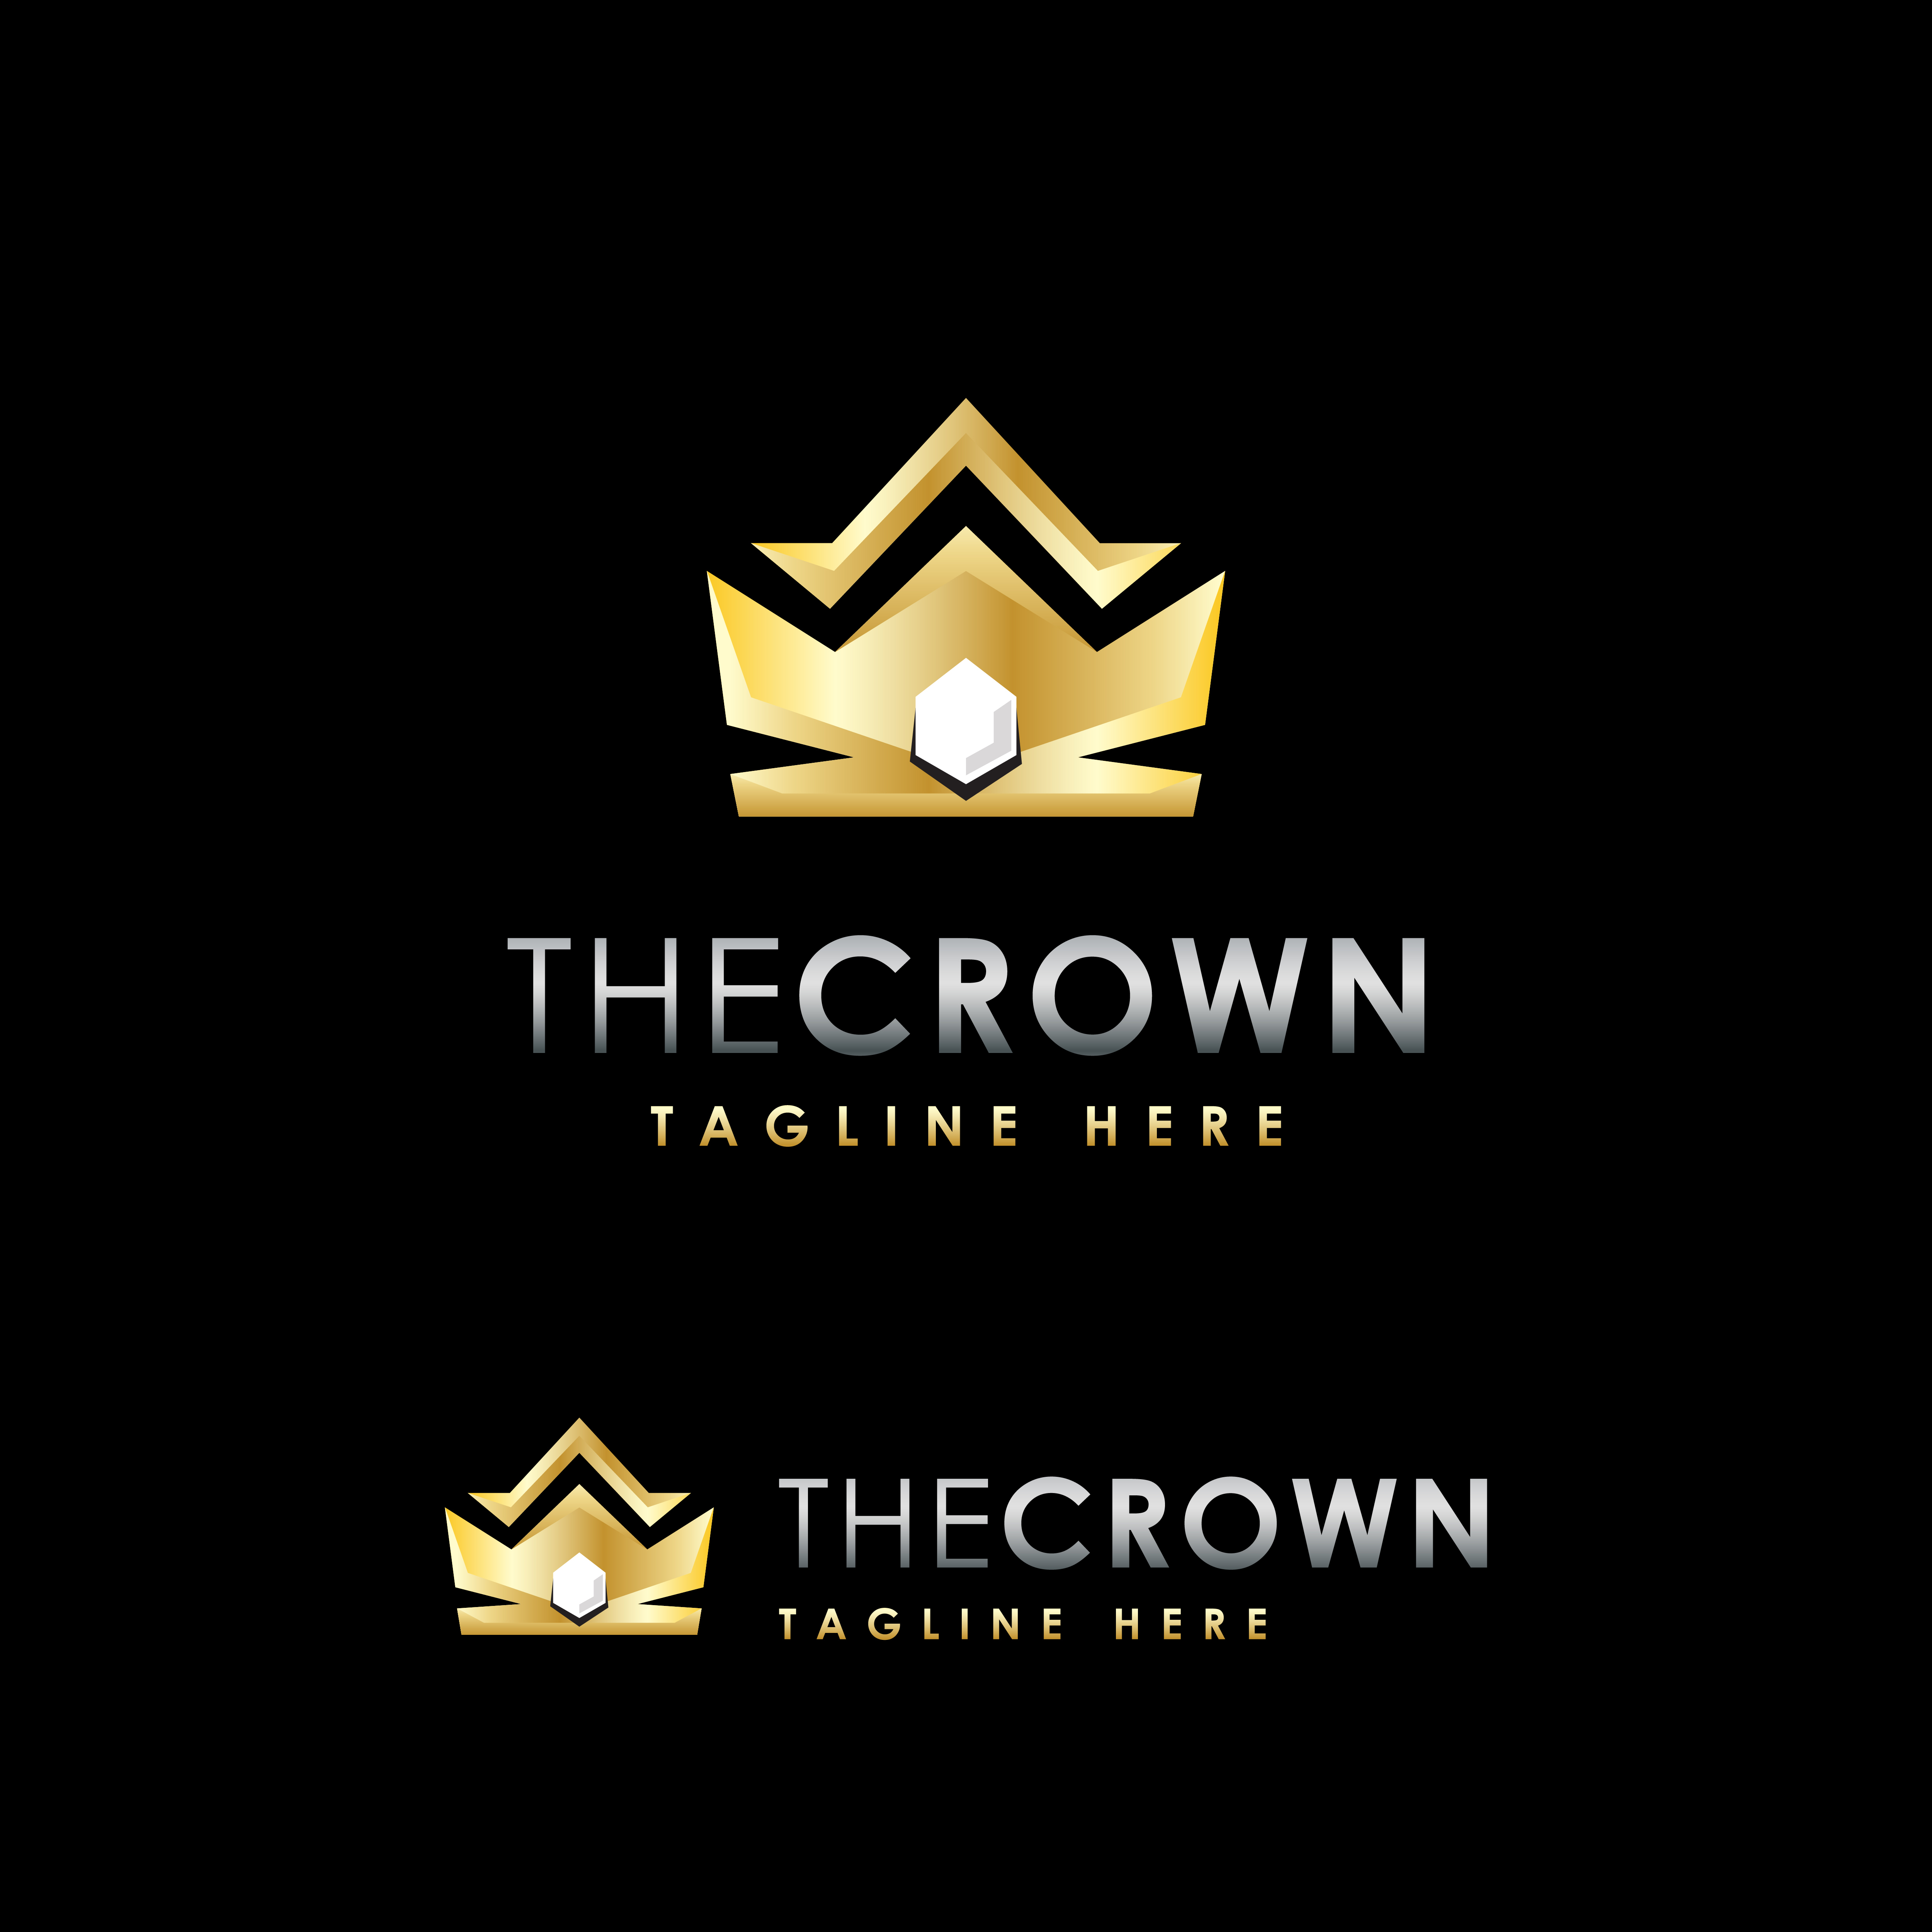 crown Logo Design Vector Template Modern And Minimalism